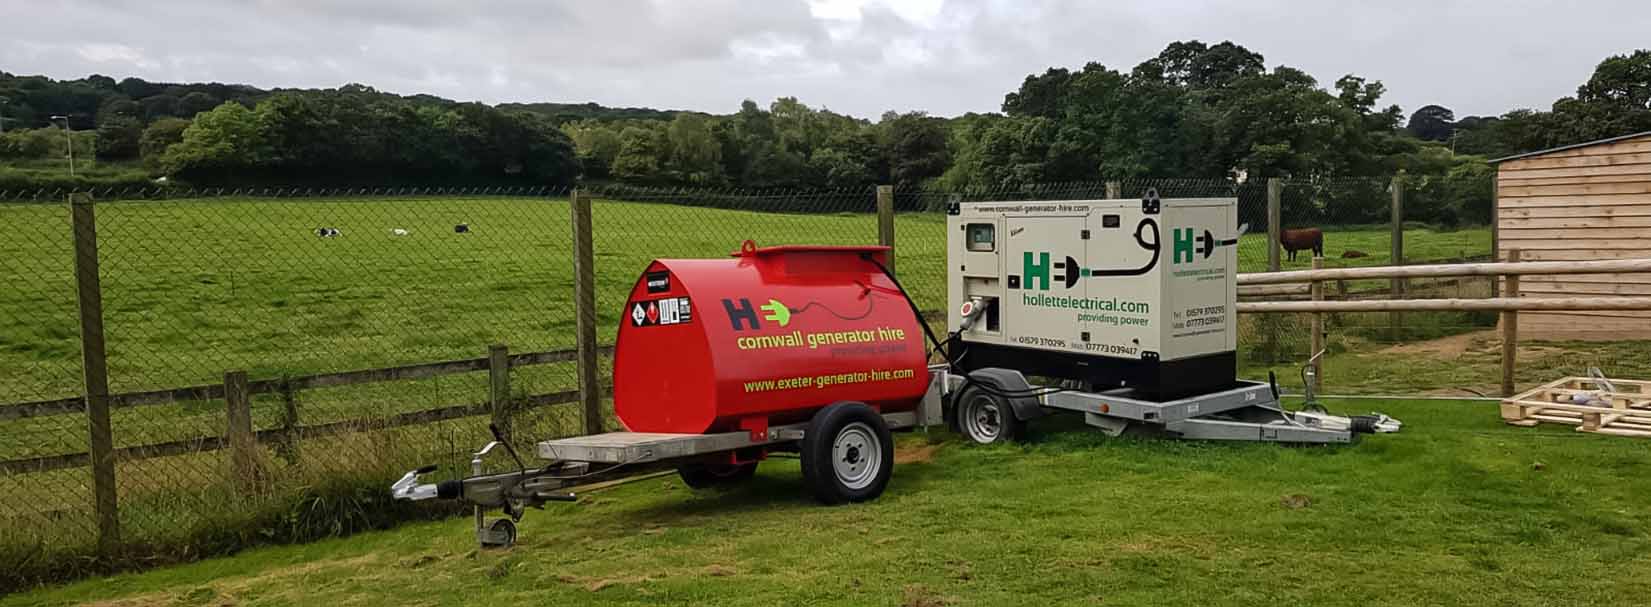 Cornwall generator and fuel bowser for hire